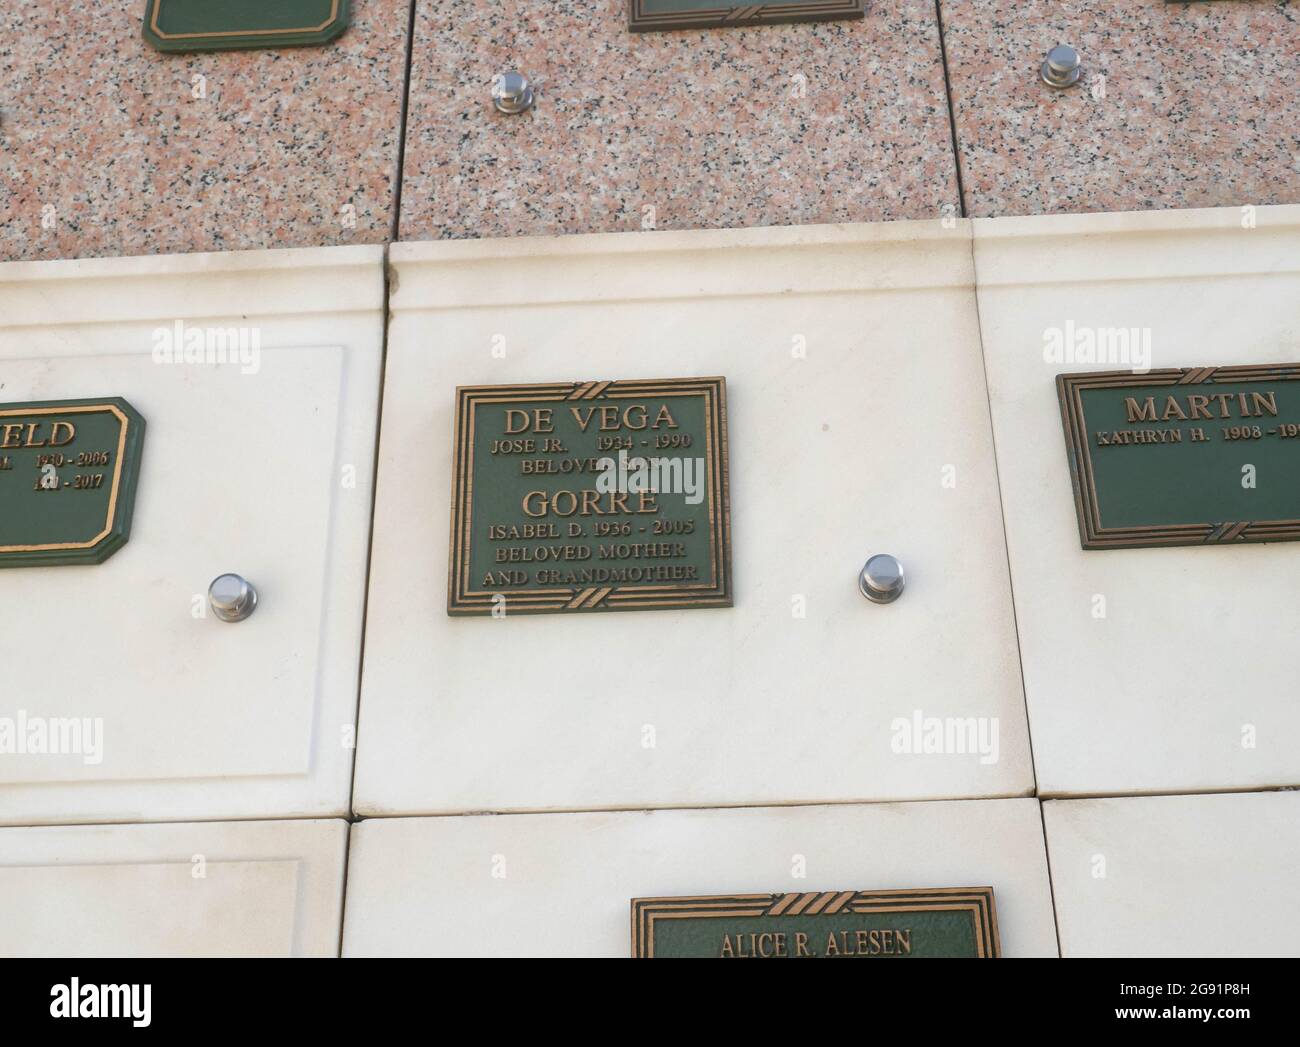 Glendale, California, USA 22nd July 2021 A general view of atmosphere of Actor Jose De Vega Jr.'s Grave in Columbarium of Heavenly Peace in Court of Freedom at Forest Lawn Memorial Park on July 22, 2021 in Glendale, California, USA. Photo by Barry King/Alamy Stock Photo Stock Photo